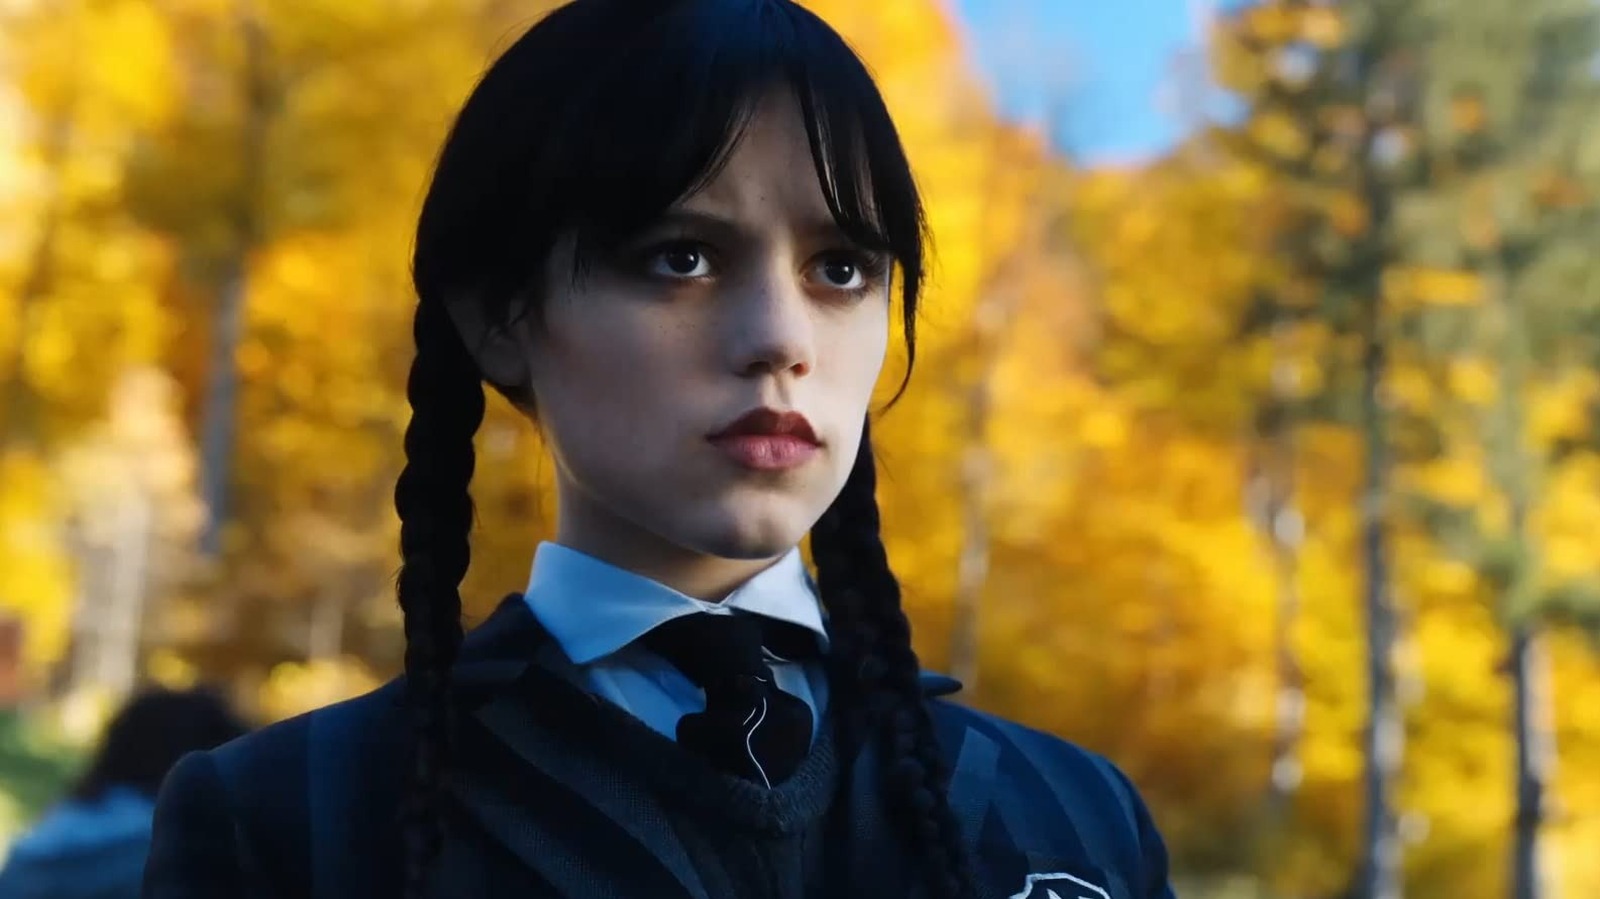 Why Wednesday is what made Tim Burton finally do an Addams Family project